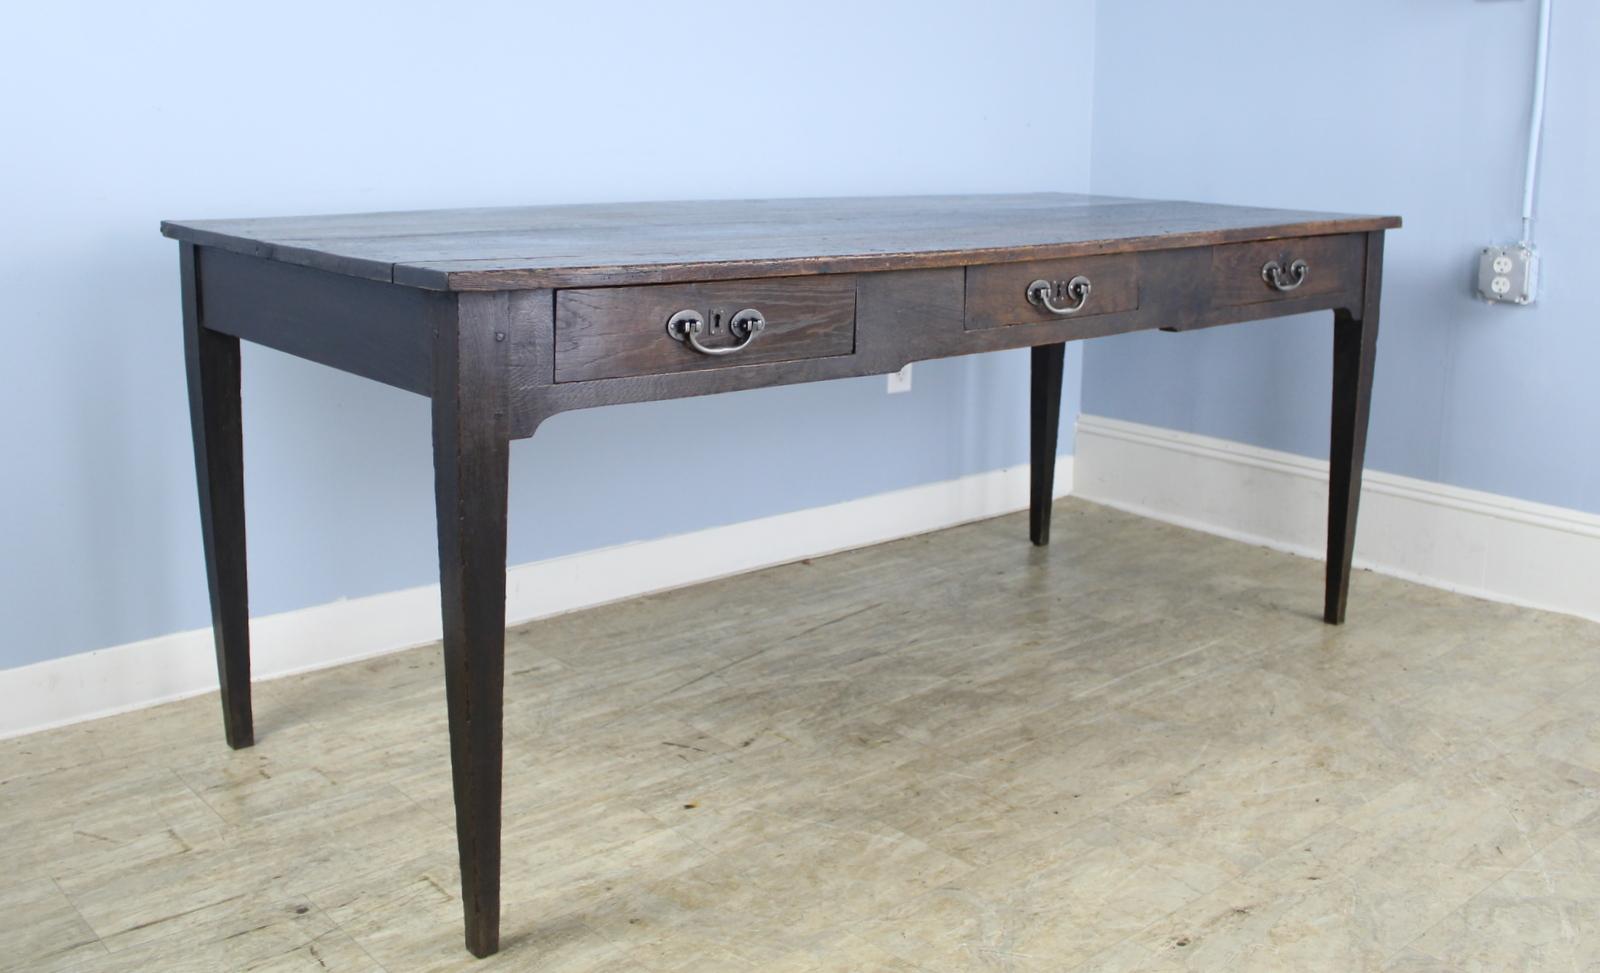 A classic dark oak farm table with three roomy drawers in the apron. There is a small area of old wear at the edge of the table top, shown in the thumbnails. Iron drop handles are new. Apron height of 24 inches is good for knees and there are 70.5